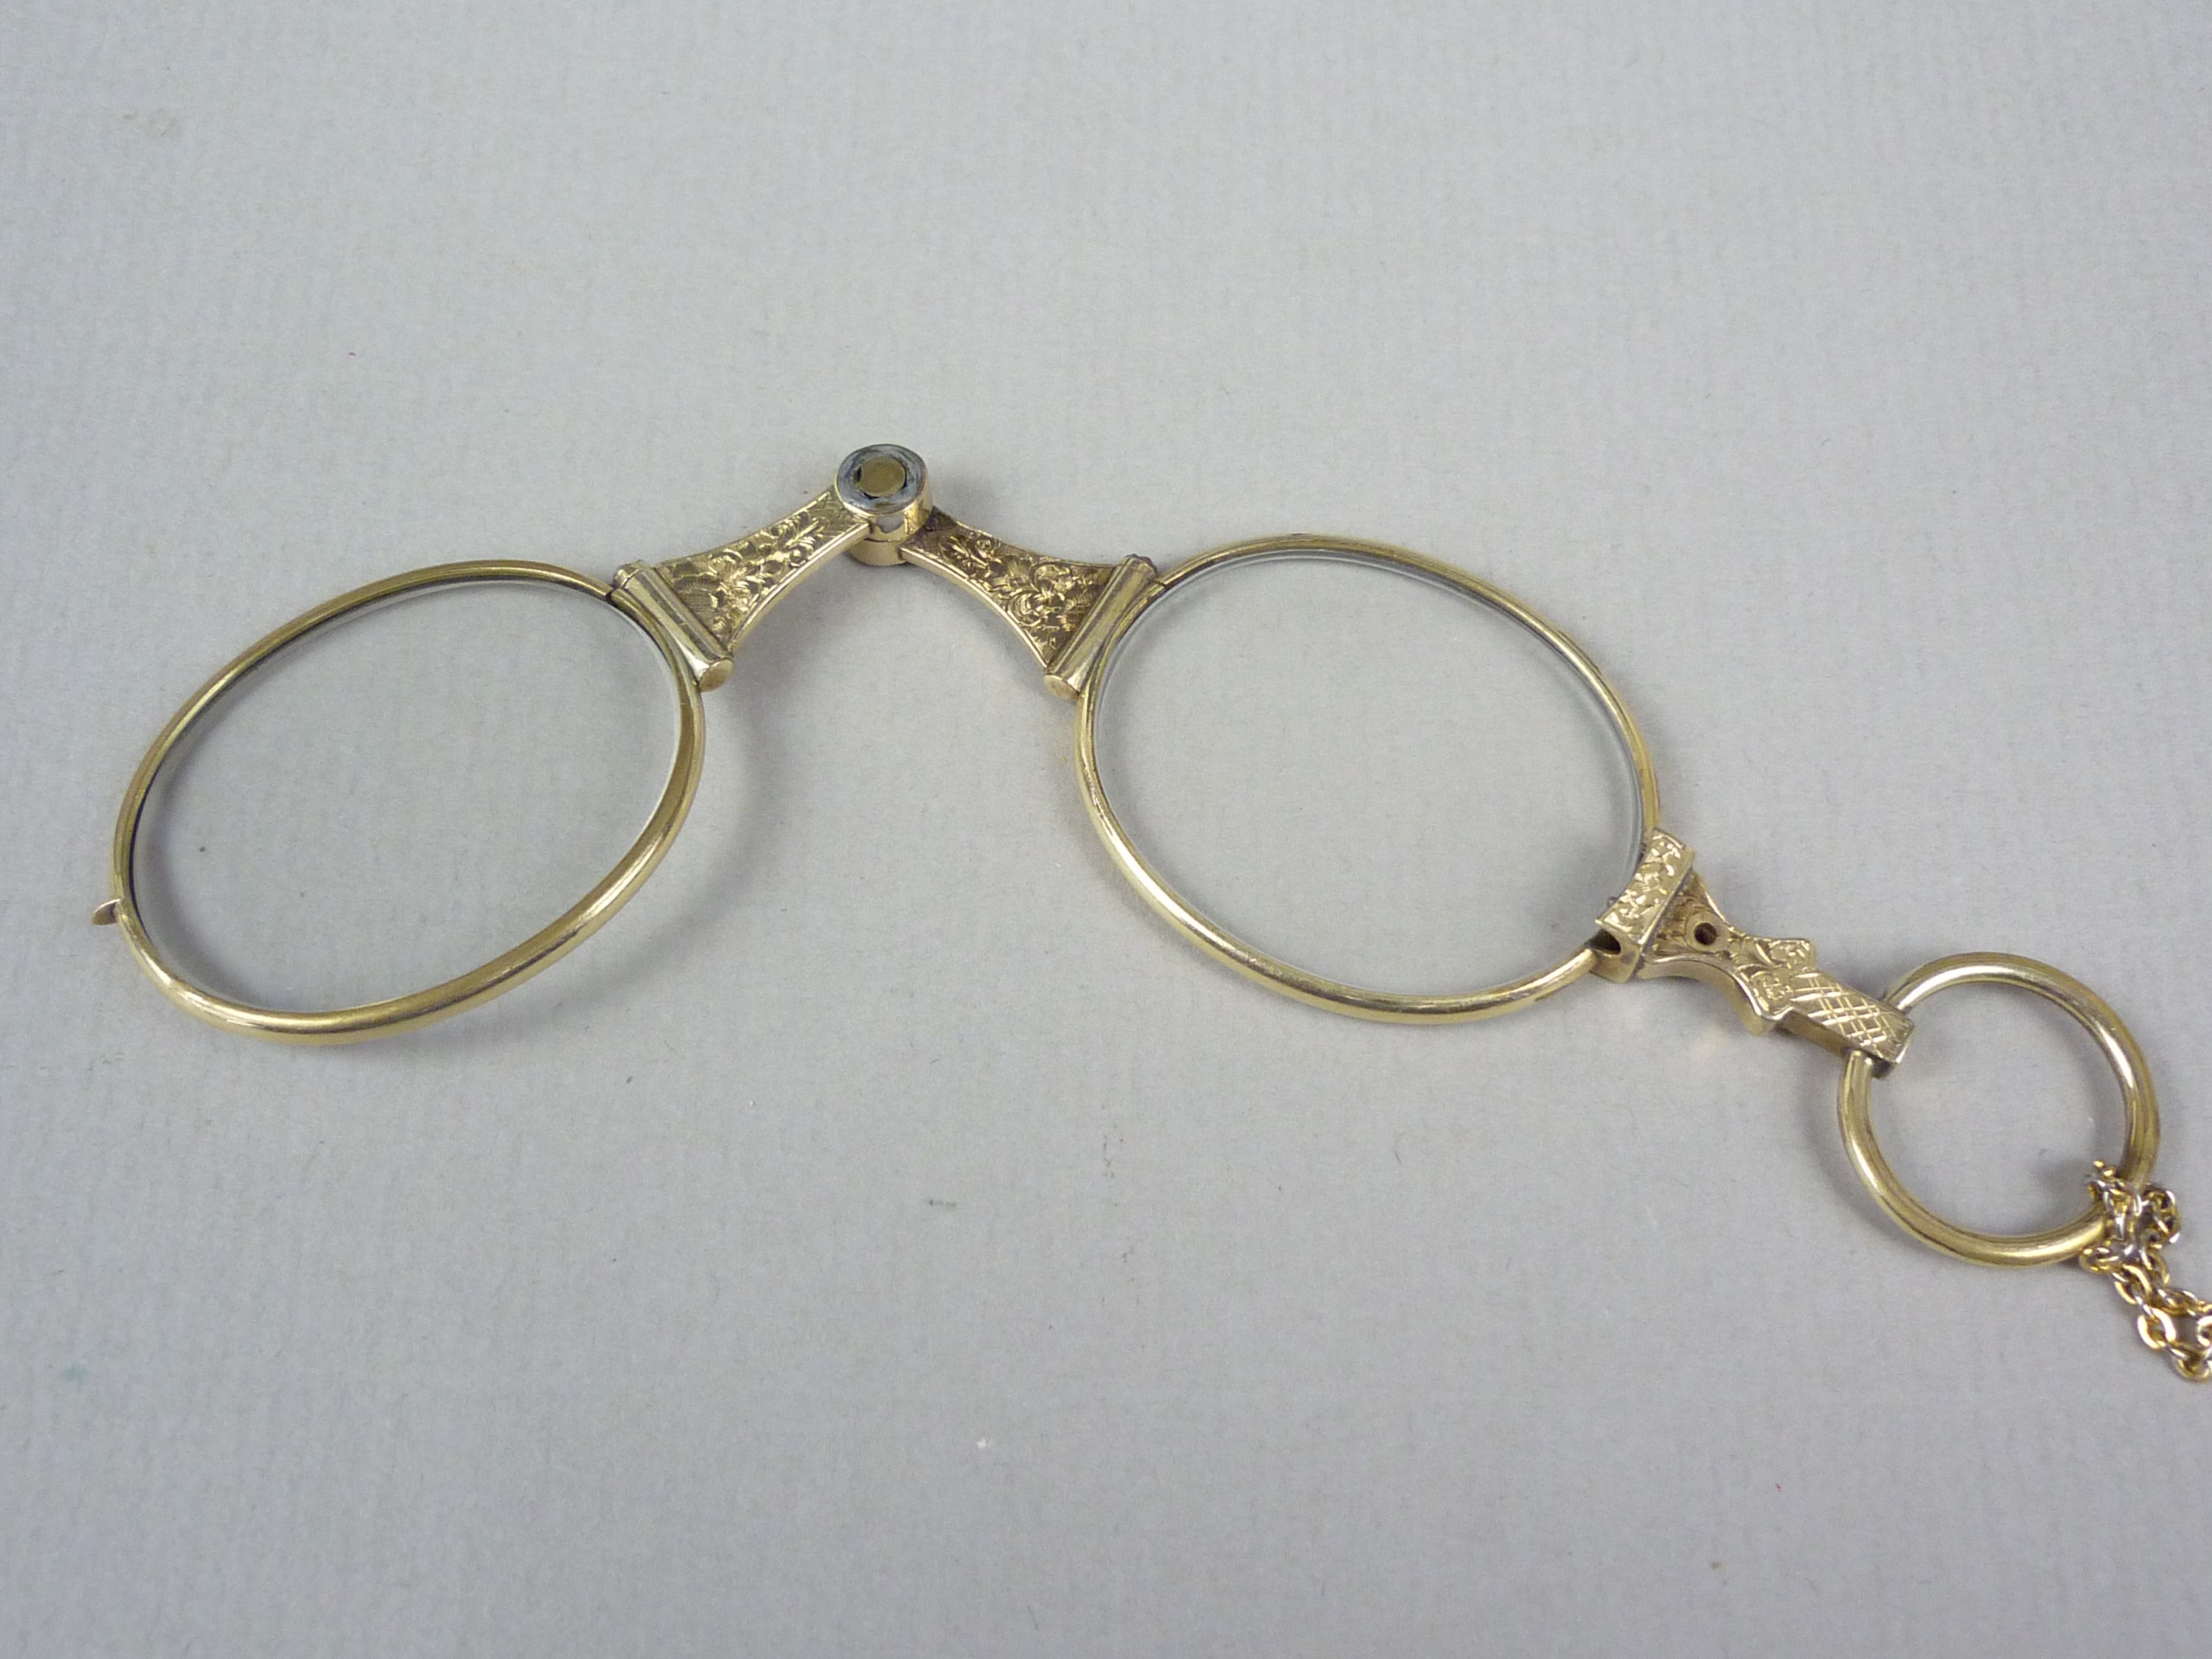 An early 20th Century rolled gold lorgnette, with engraved decoration, on a rolled-gold neck chain - Image 2 of 2